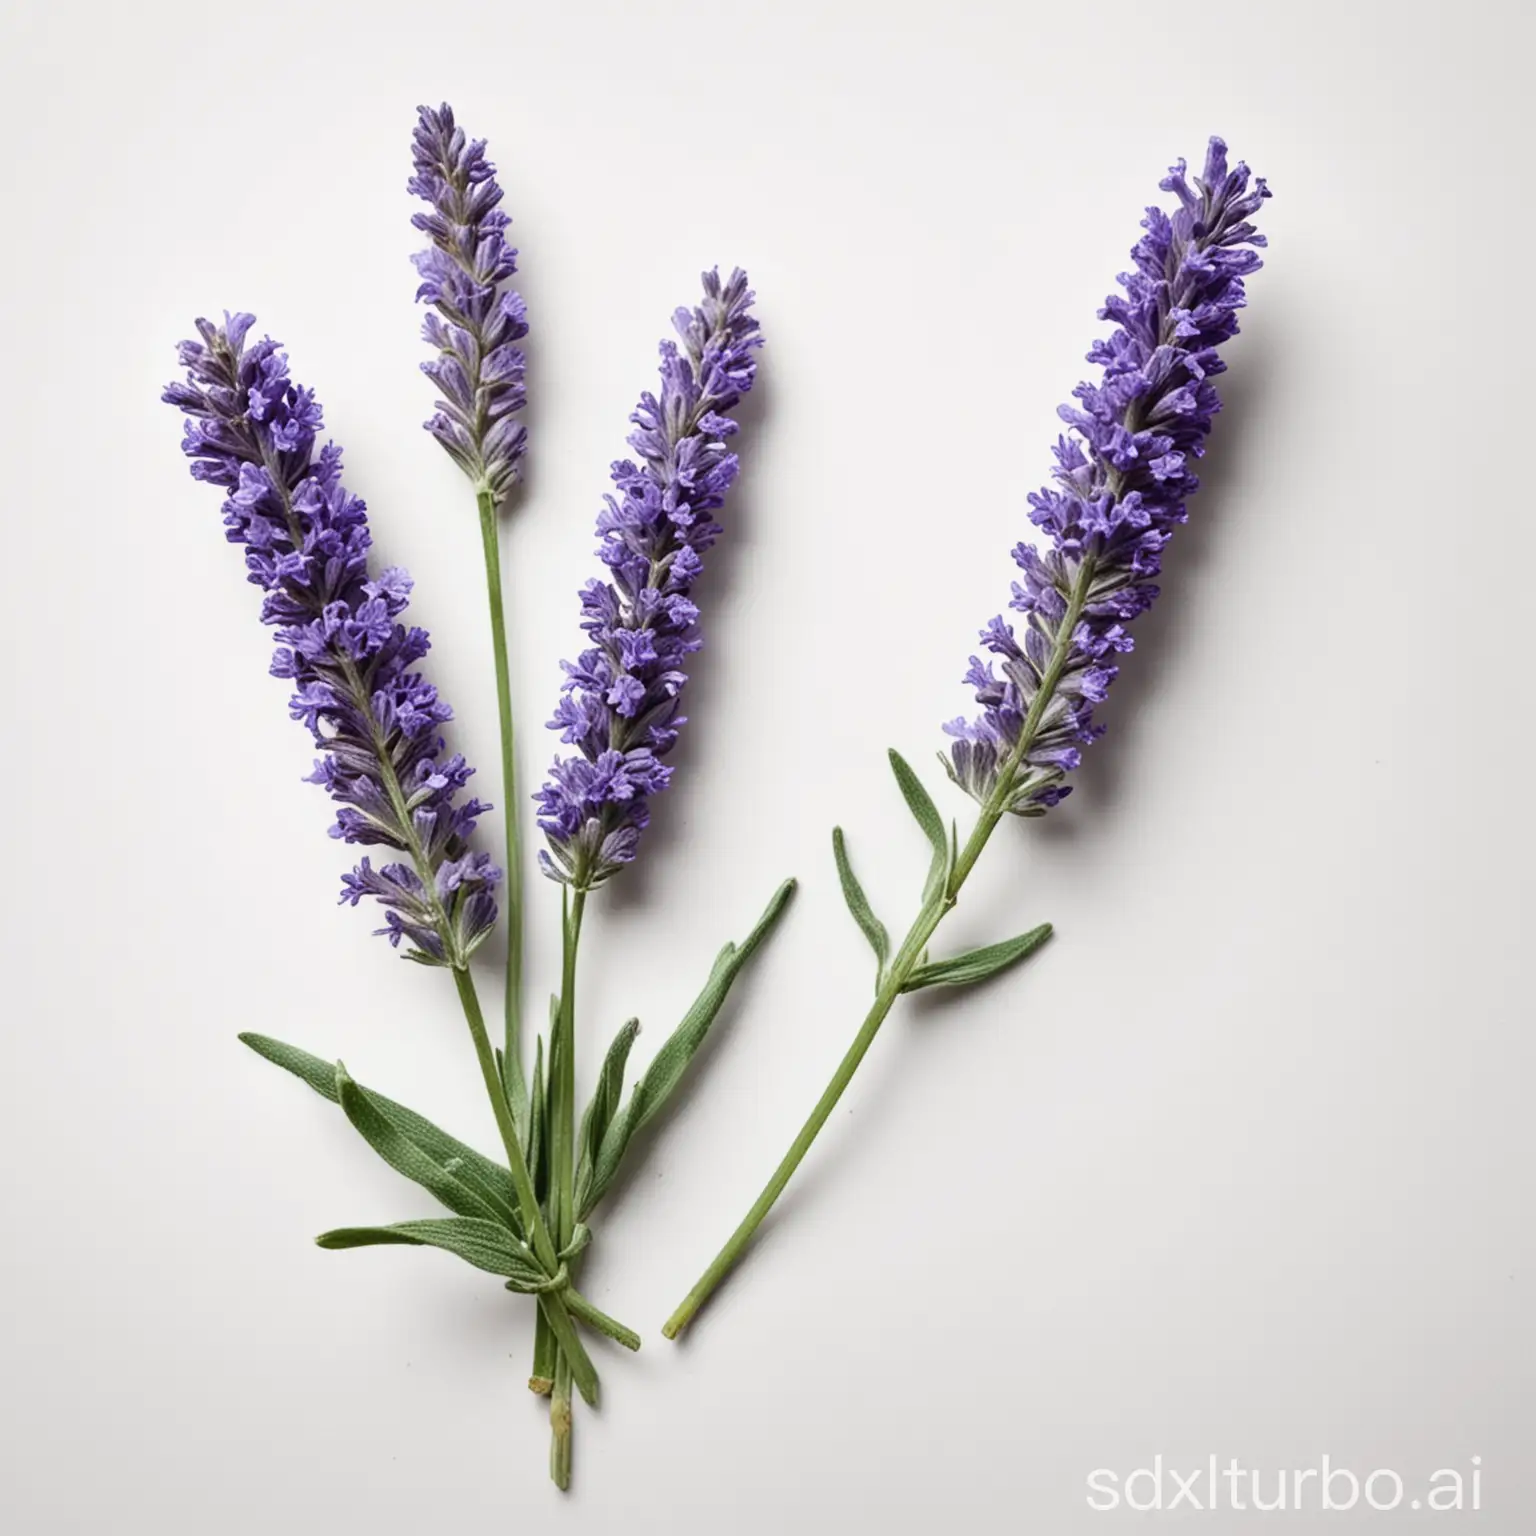 Draw one Lavender on a white background